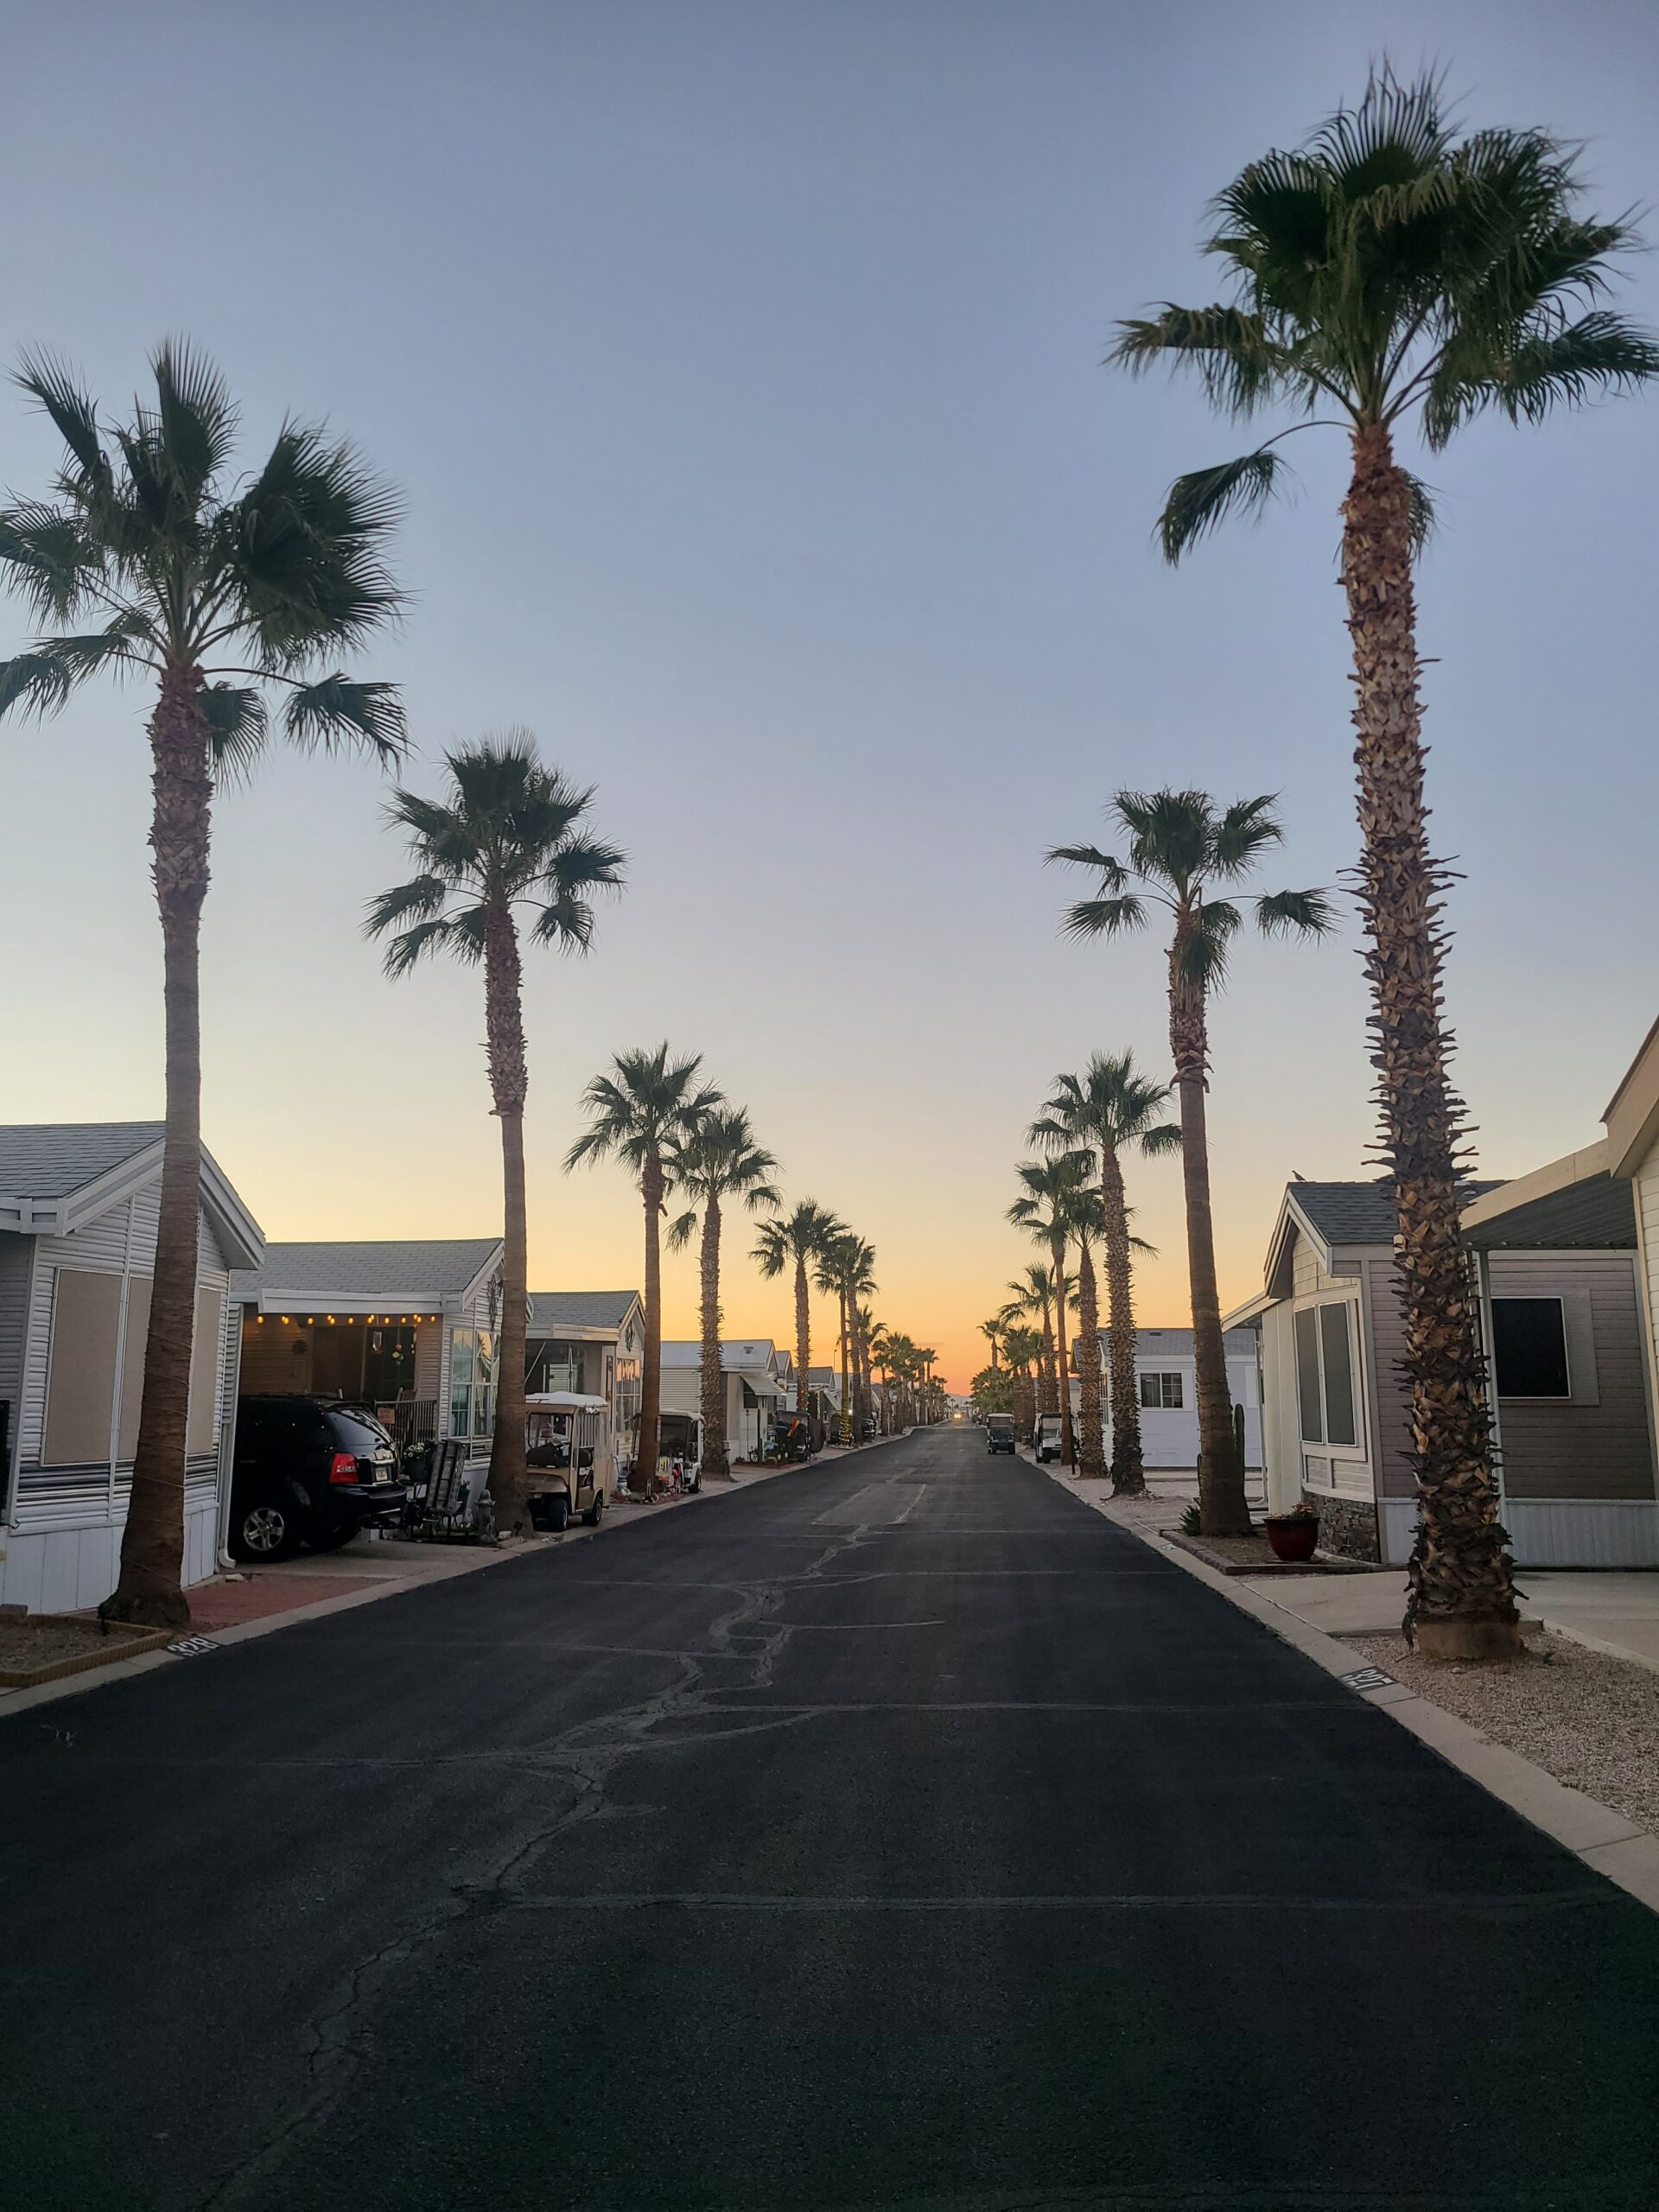 the voyager rv park